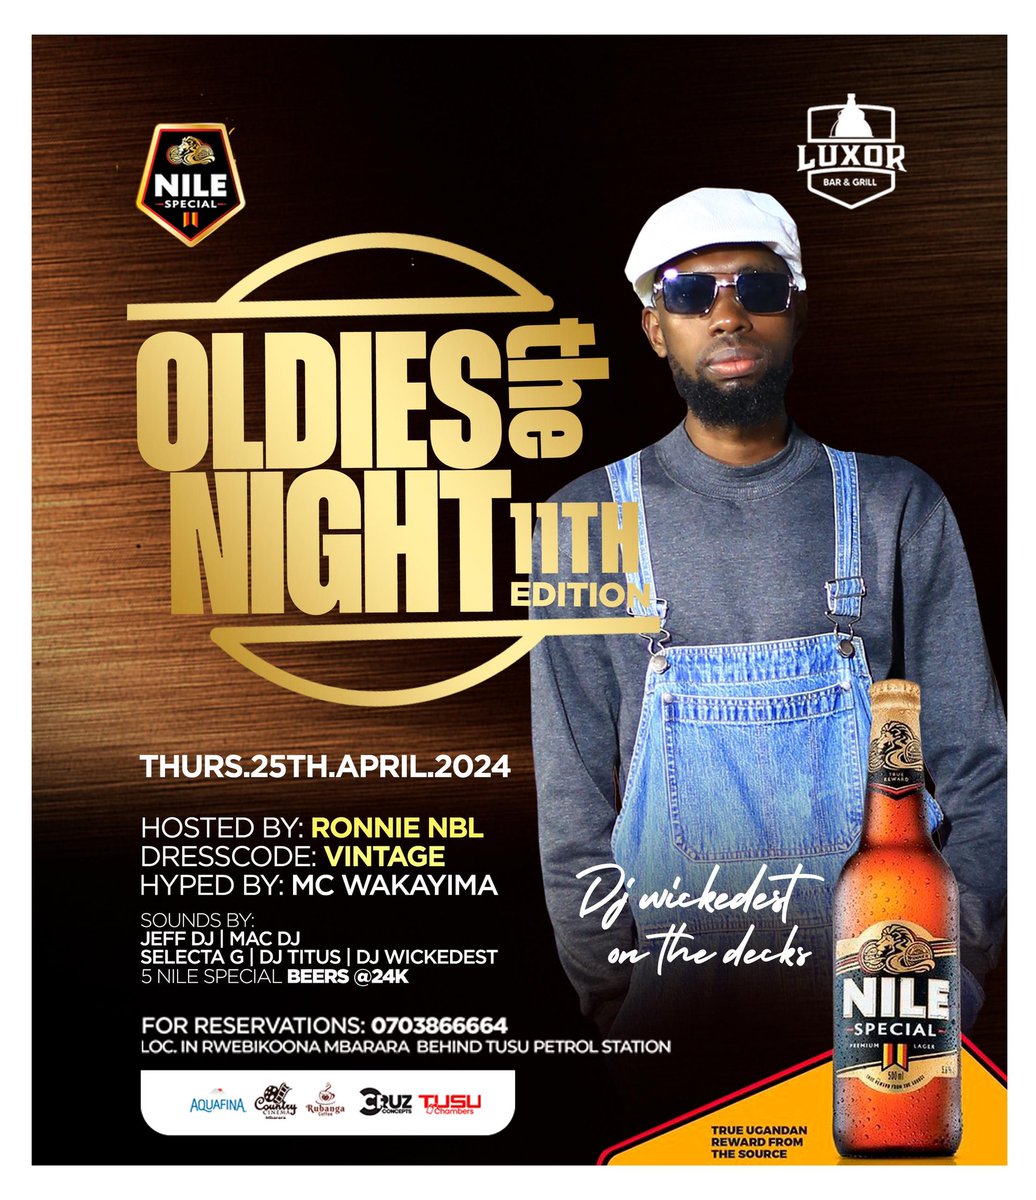 Oldies night party 🔥🔥🔥happening at luxor tonight